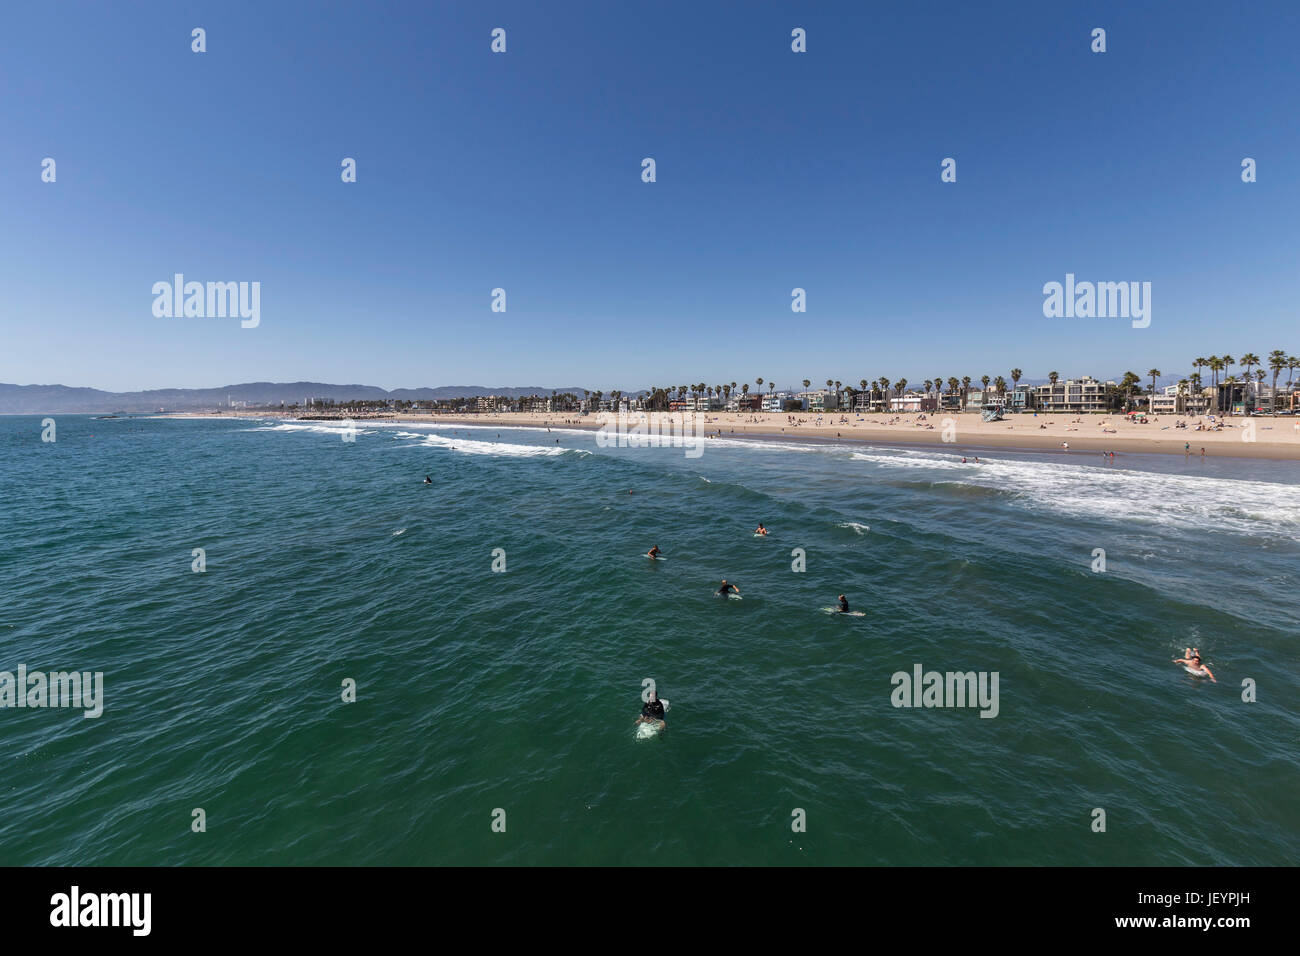 Los Angeles, California, USA - June 26, 2017:  Surfers waiting for waves at Venice Beach. Stock Photo